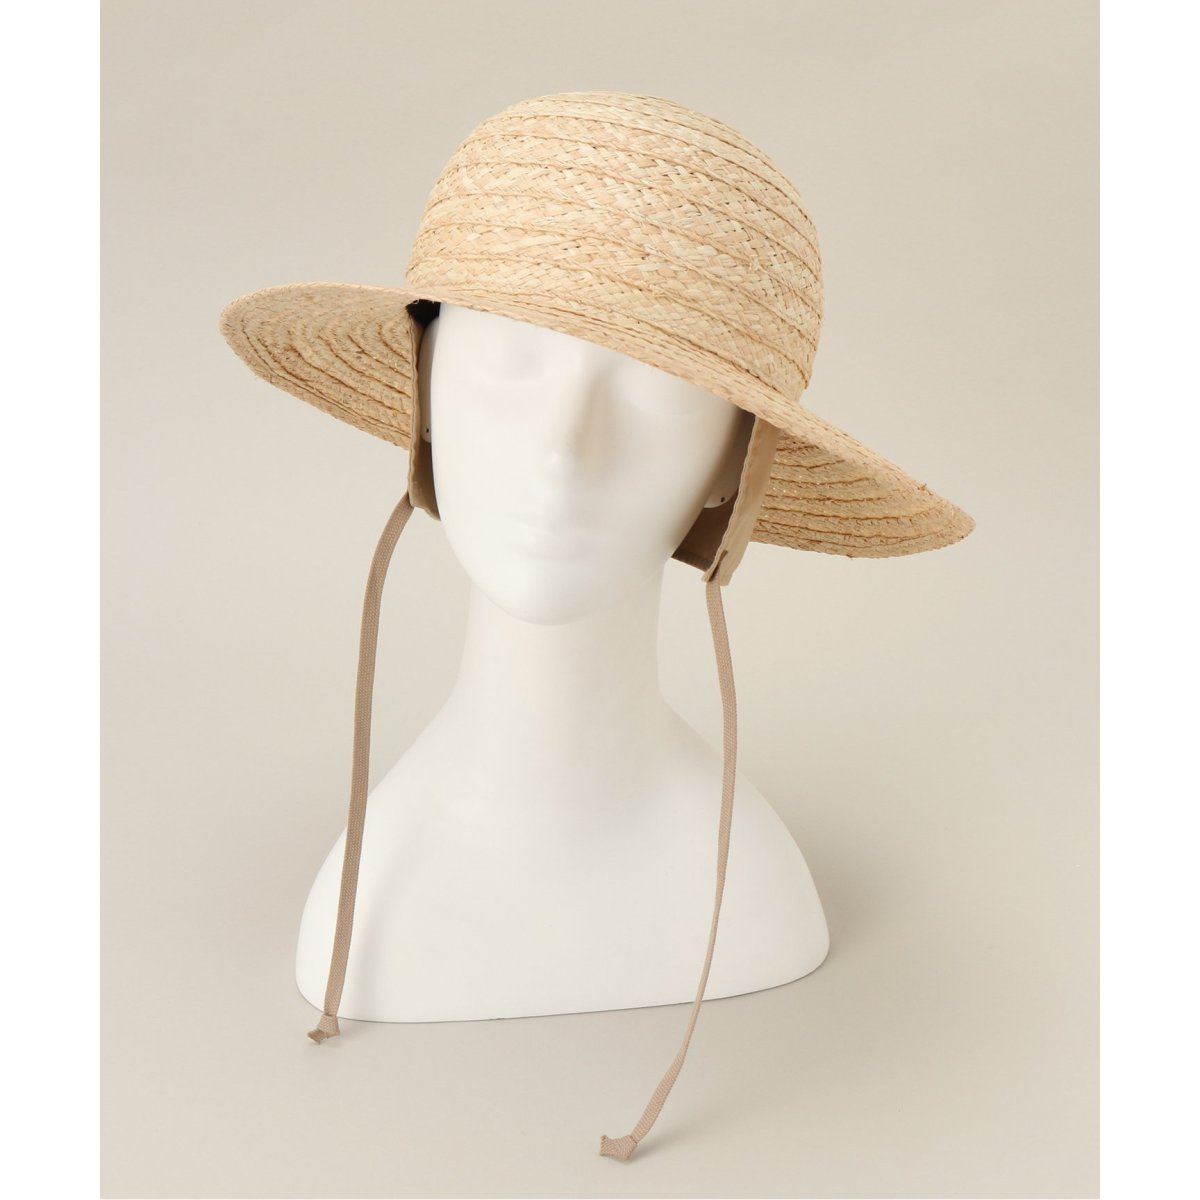 MOUNTAIN RESEARCH/マウンテンリサーチ】Straw hat ストローハット 